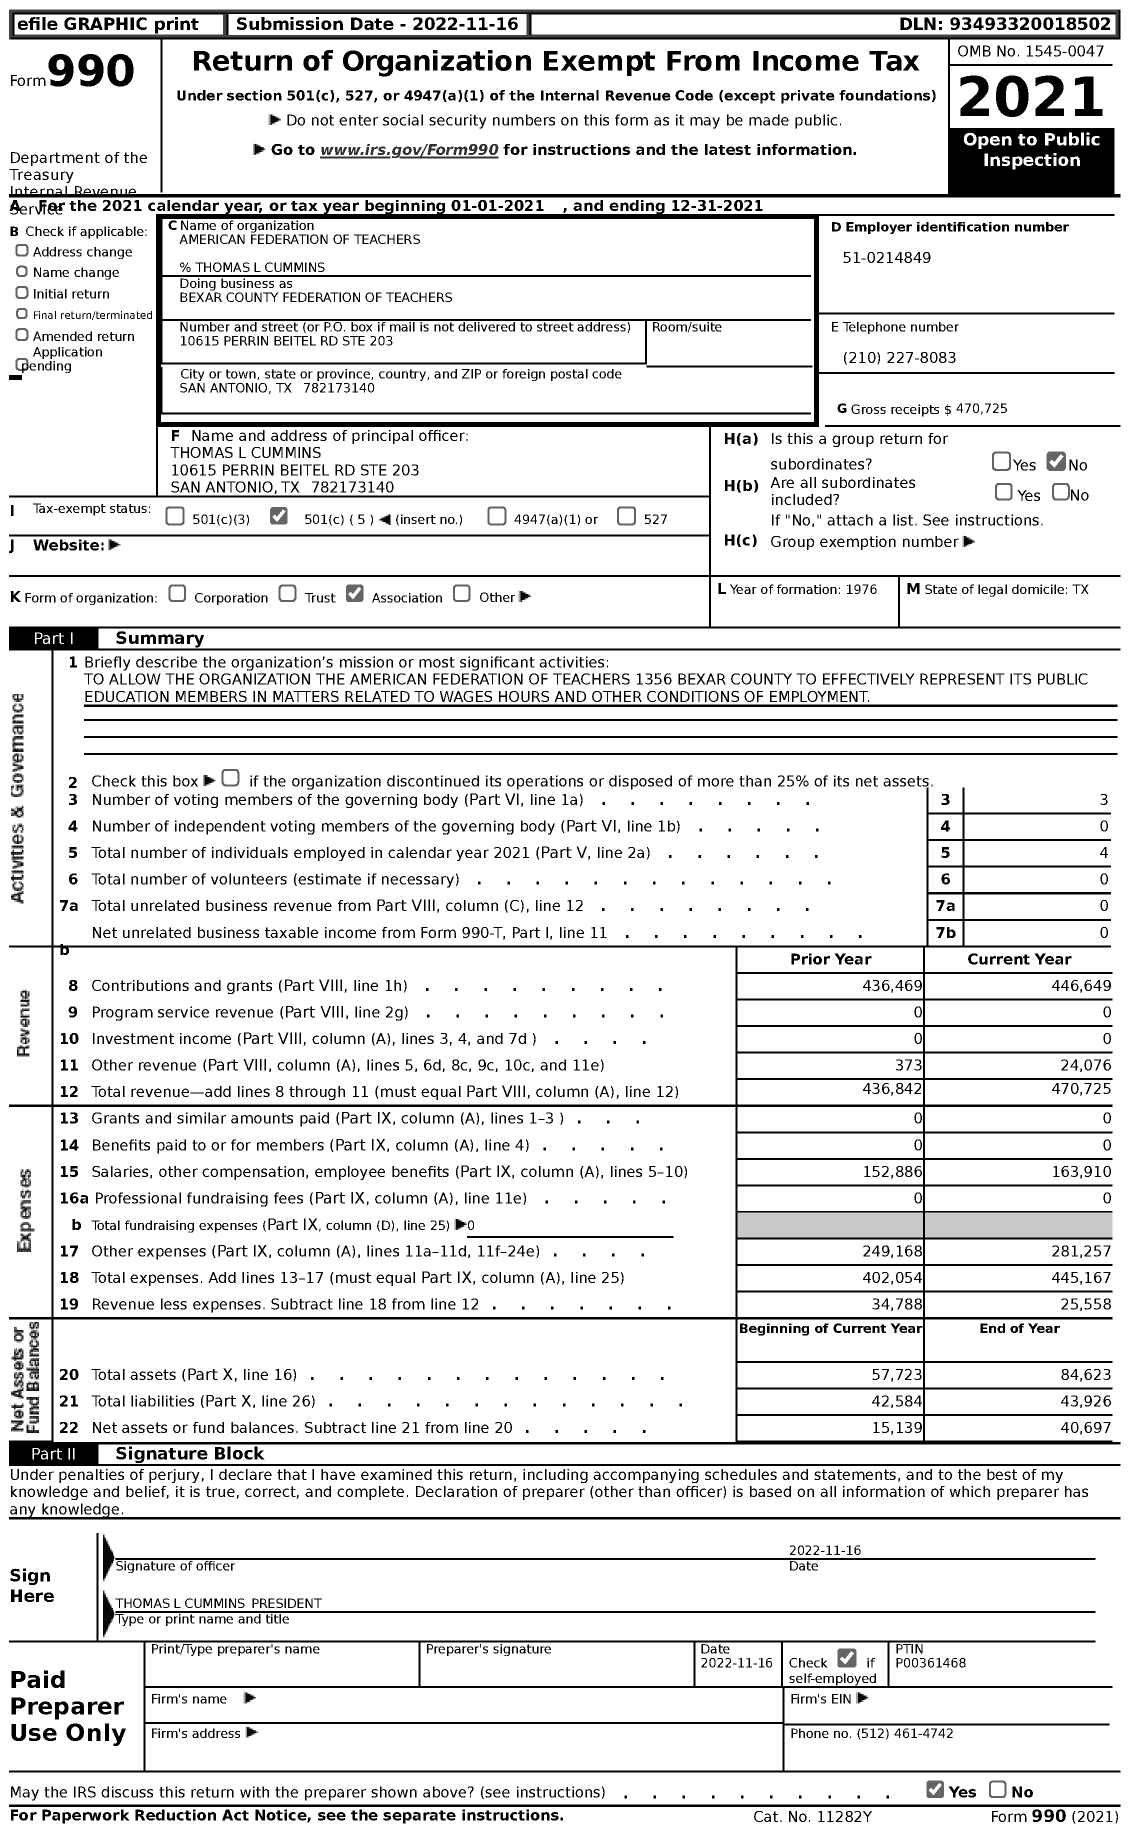 Image of first page of 2021 Form 990 for American Federation of Teachers - American Federation of Teachers 1356 Bexar County